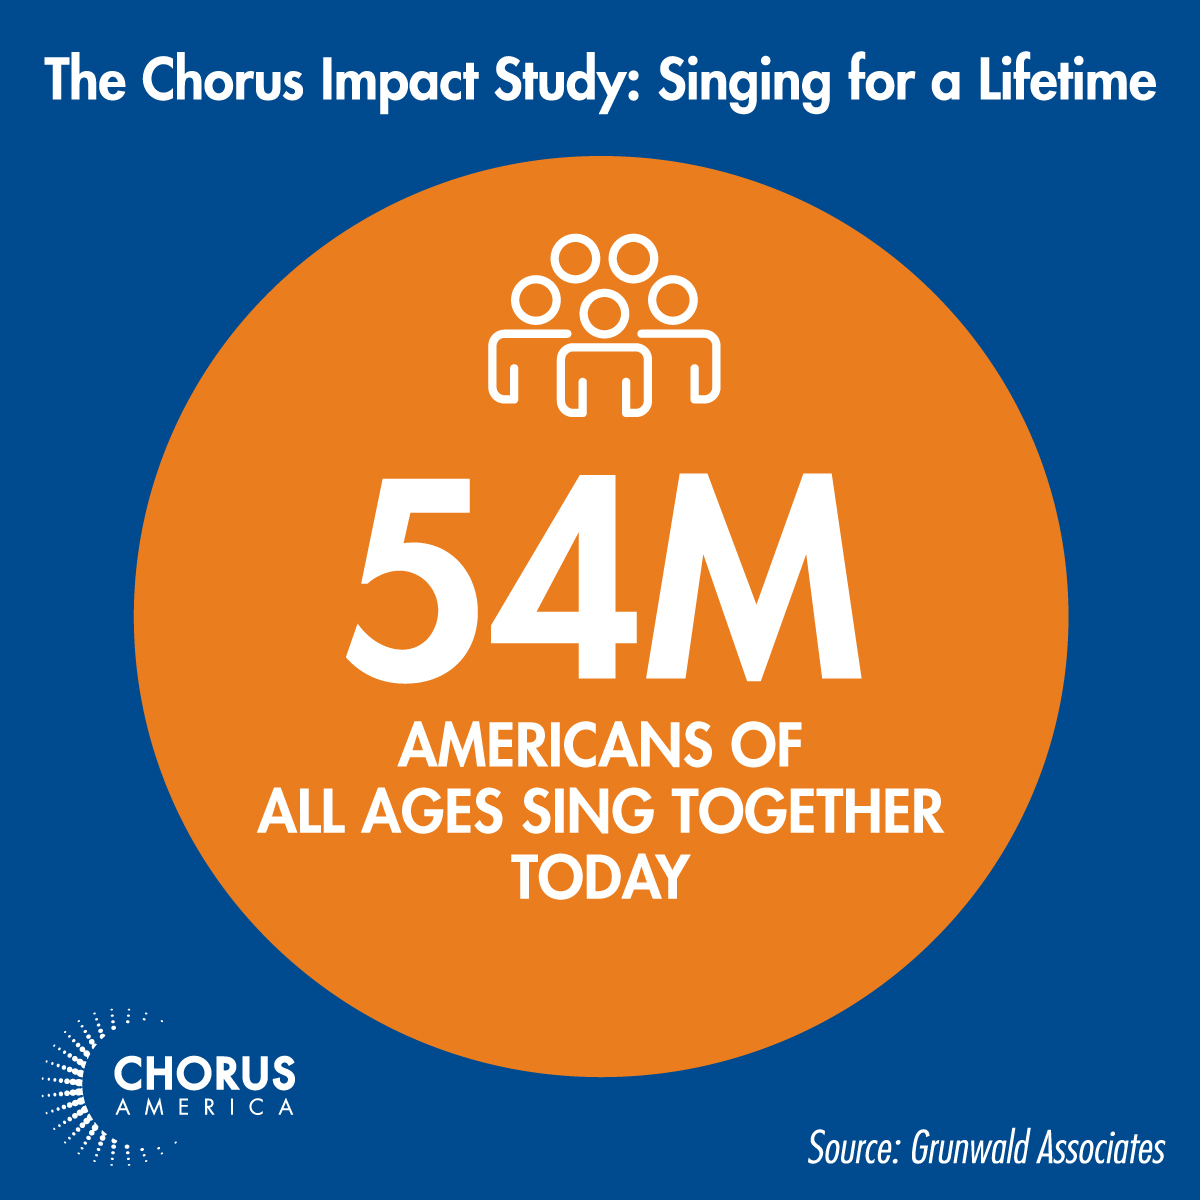 Chorus Impact Study: 54 million Americans of all ages sing together today